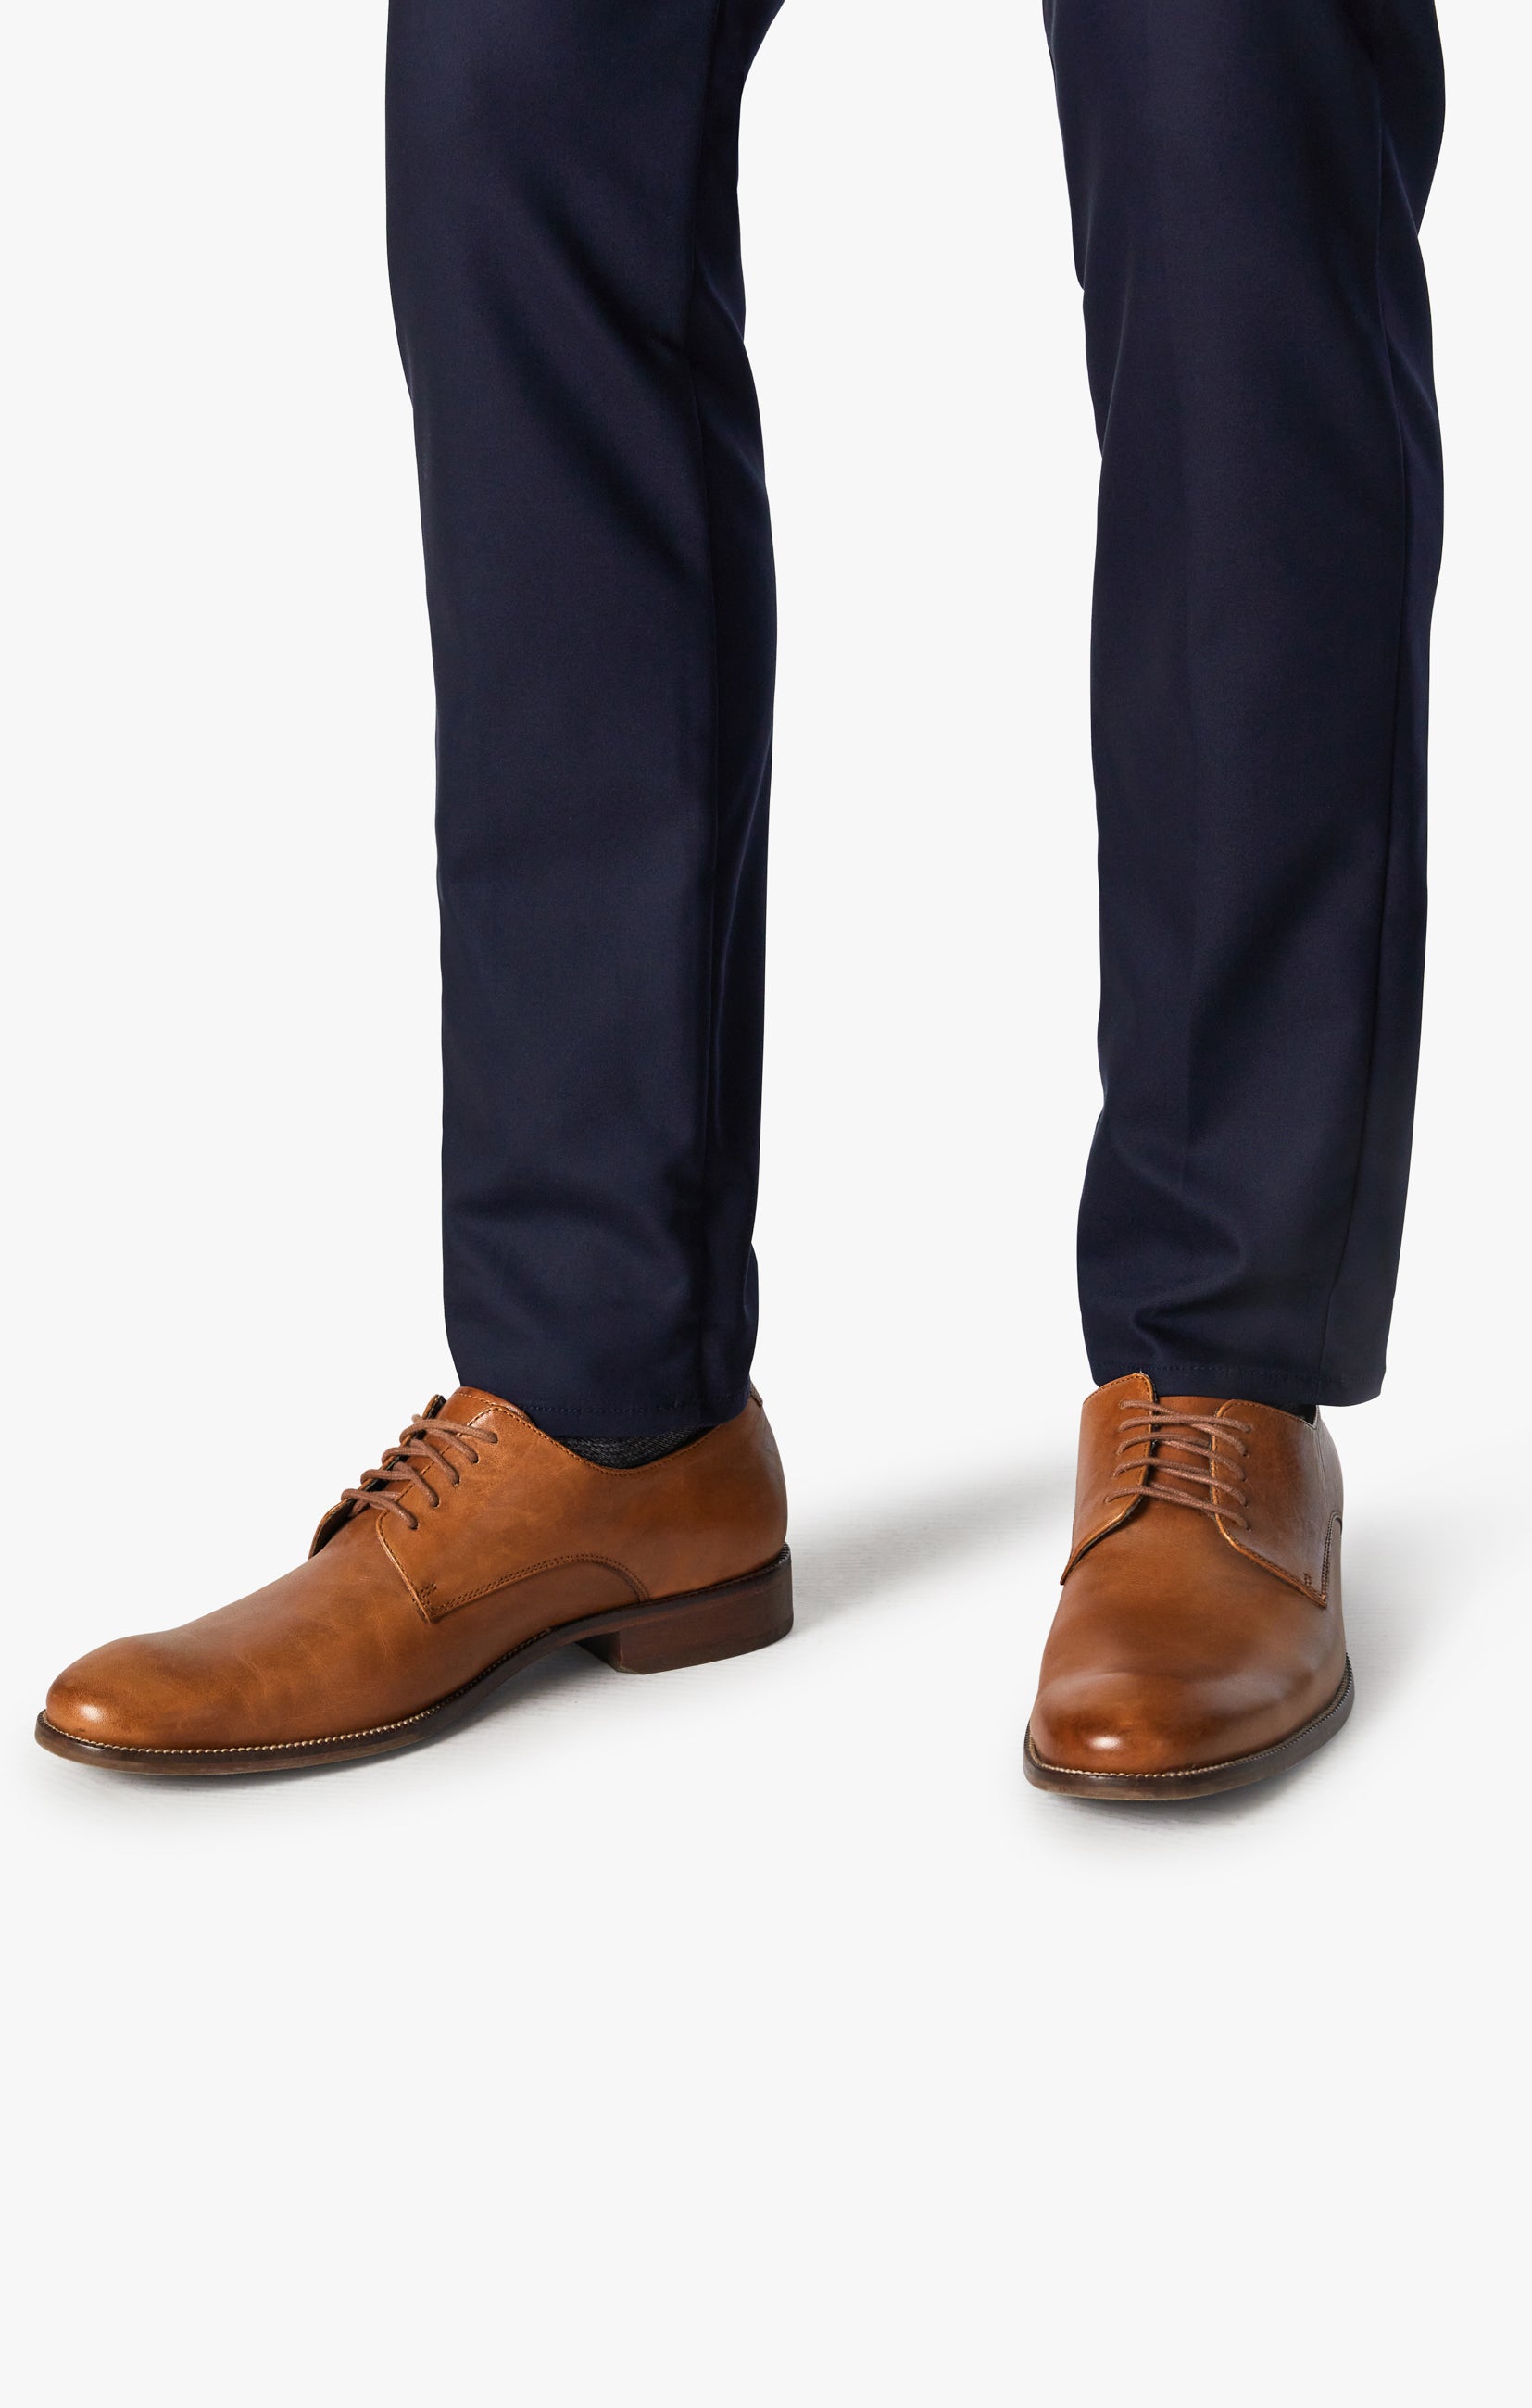 Verona Tailored Chino Pants In Navy High Flyer Image 3